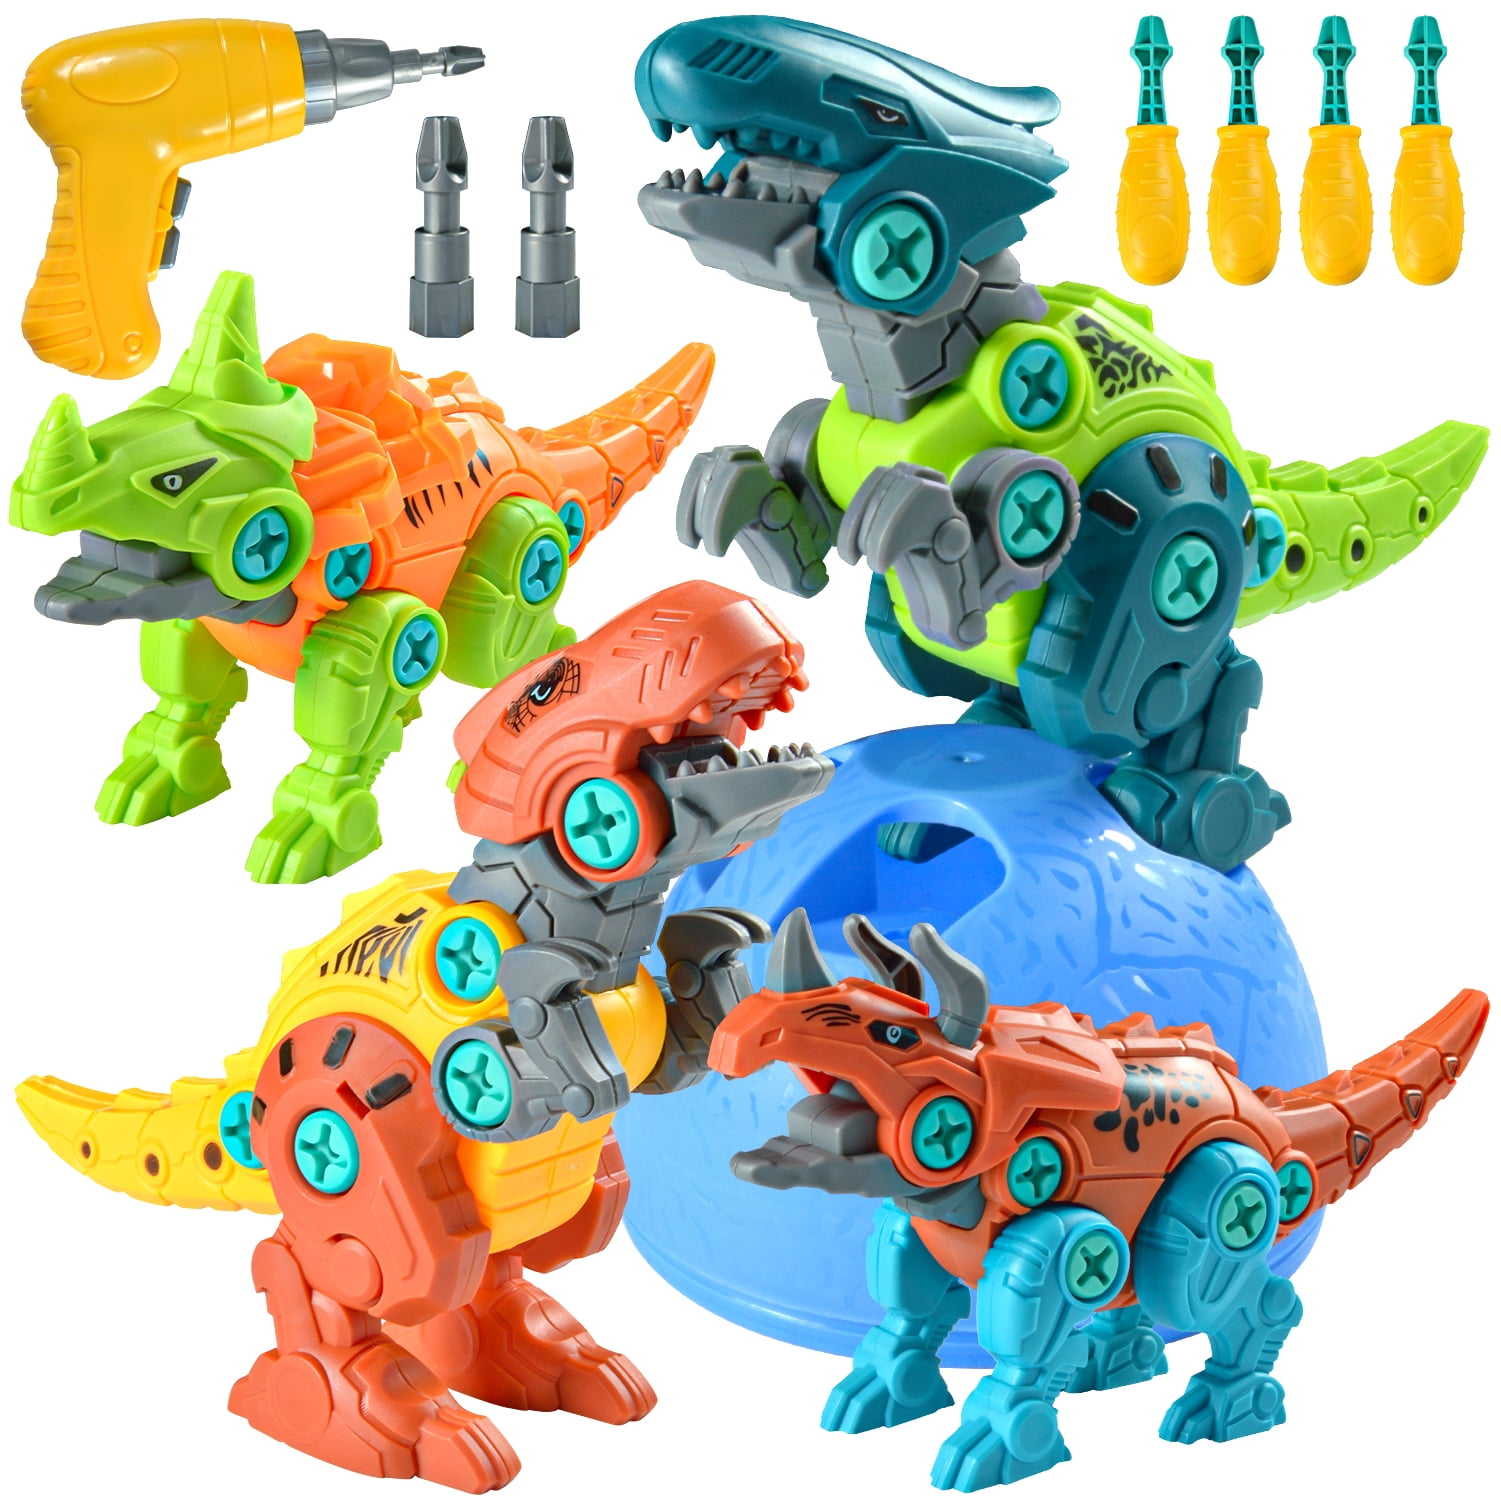 STEM Dinosaur Makes Sounds Lights Up Rolls Take Apart Dinosaur Building Toys Box for Kids Boys and Girls with Drill Kids Construction Toys Age 3 4 5 6 7 8 Year Old Birthday 